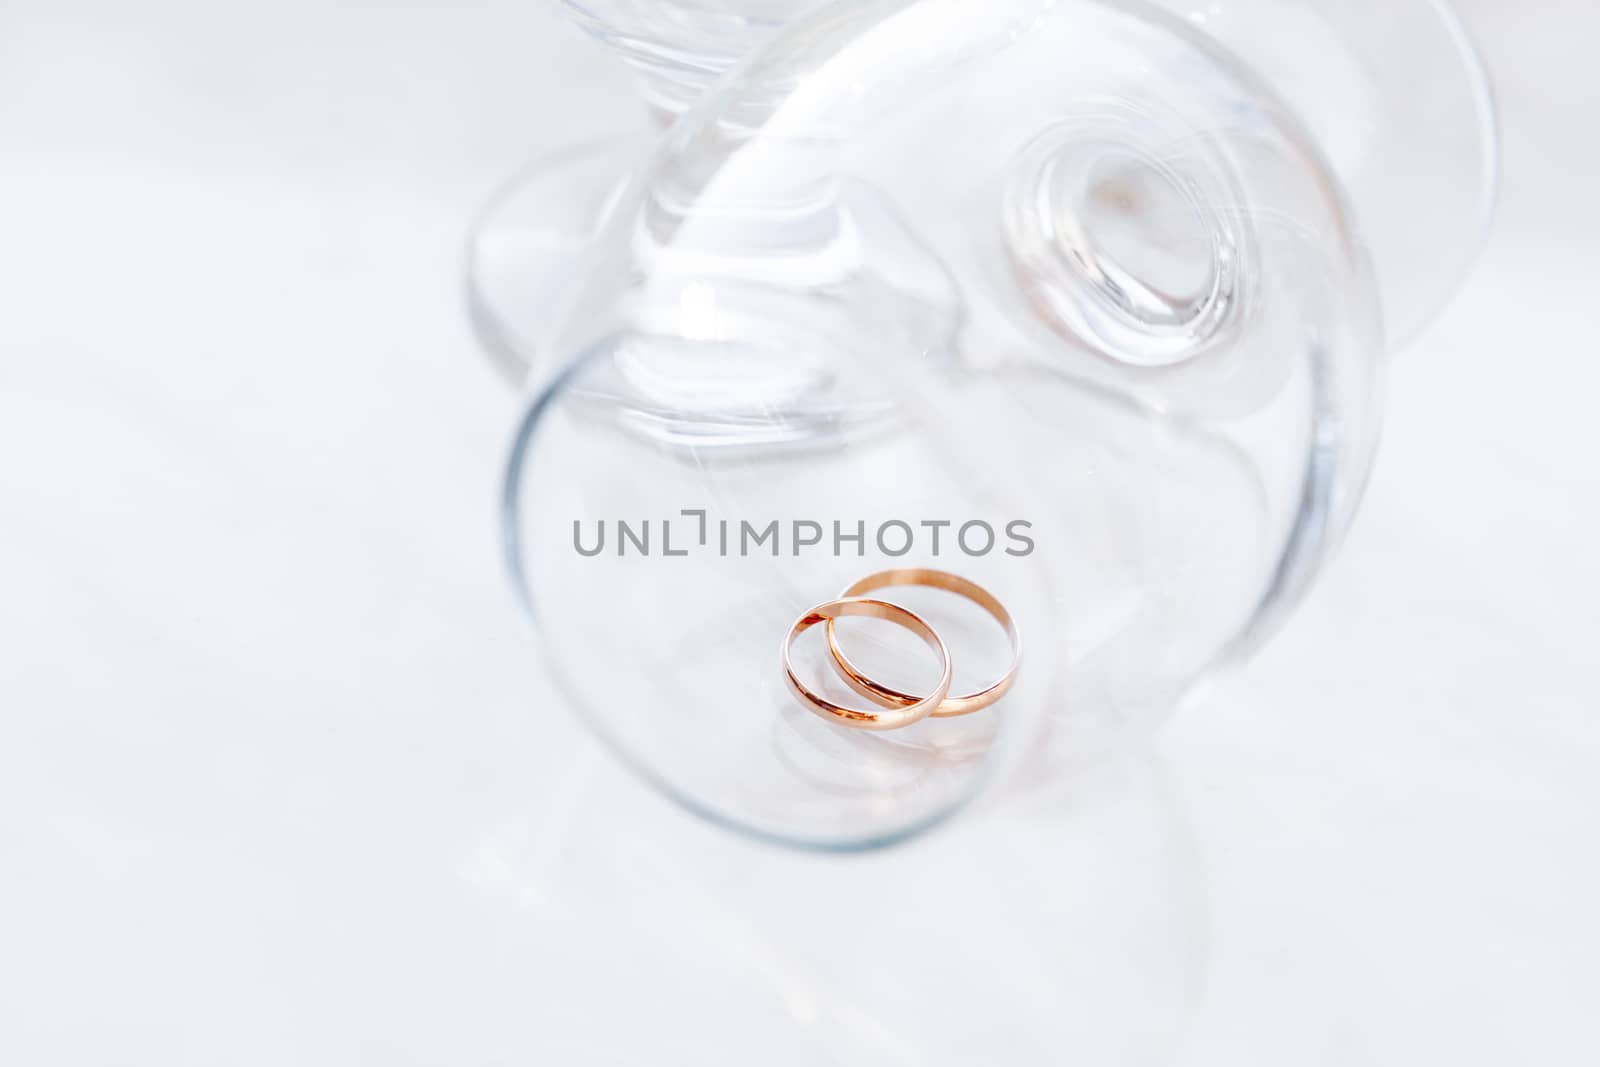 Golden wedding rings inside transparent wine glass. Symbol of love and marriage. by aksenovko